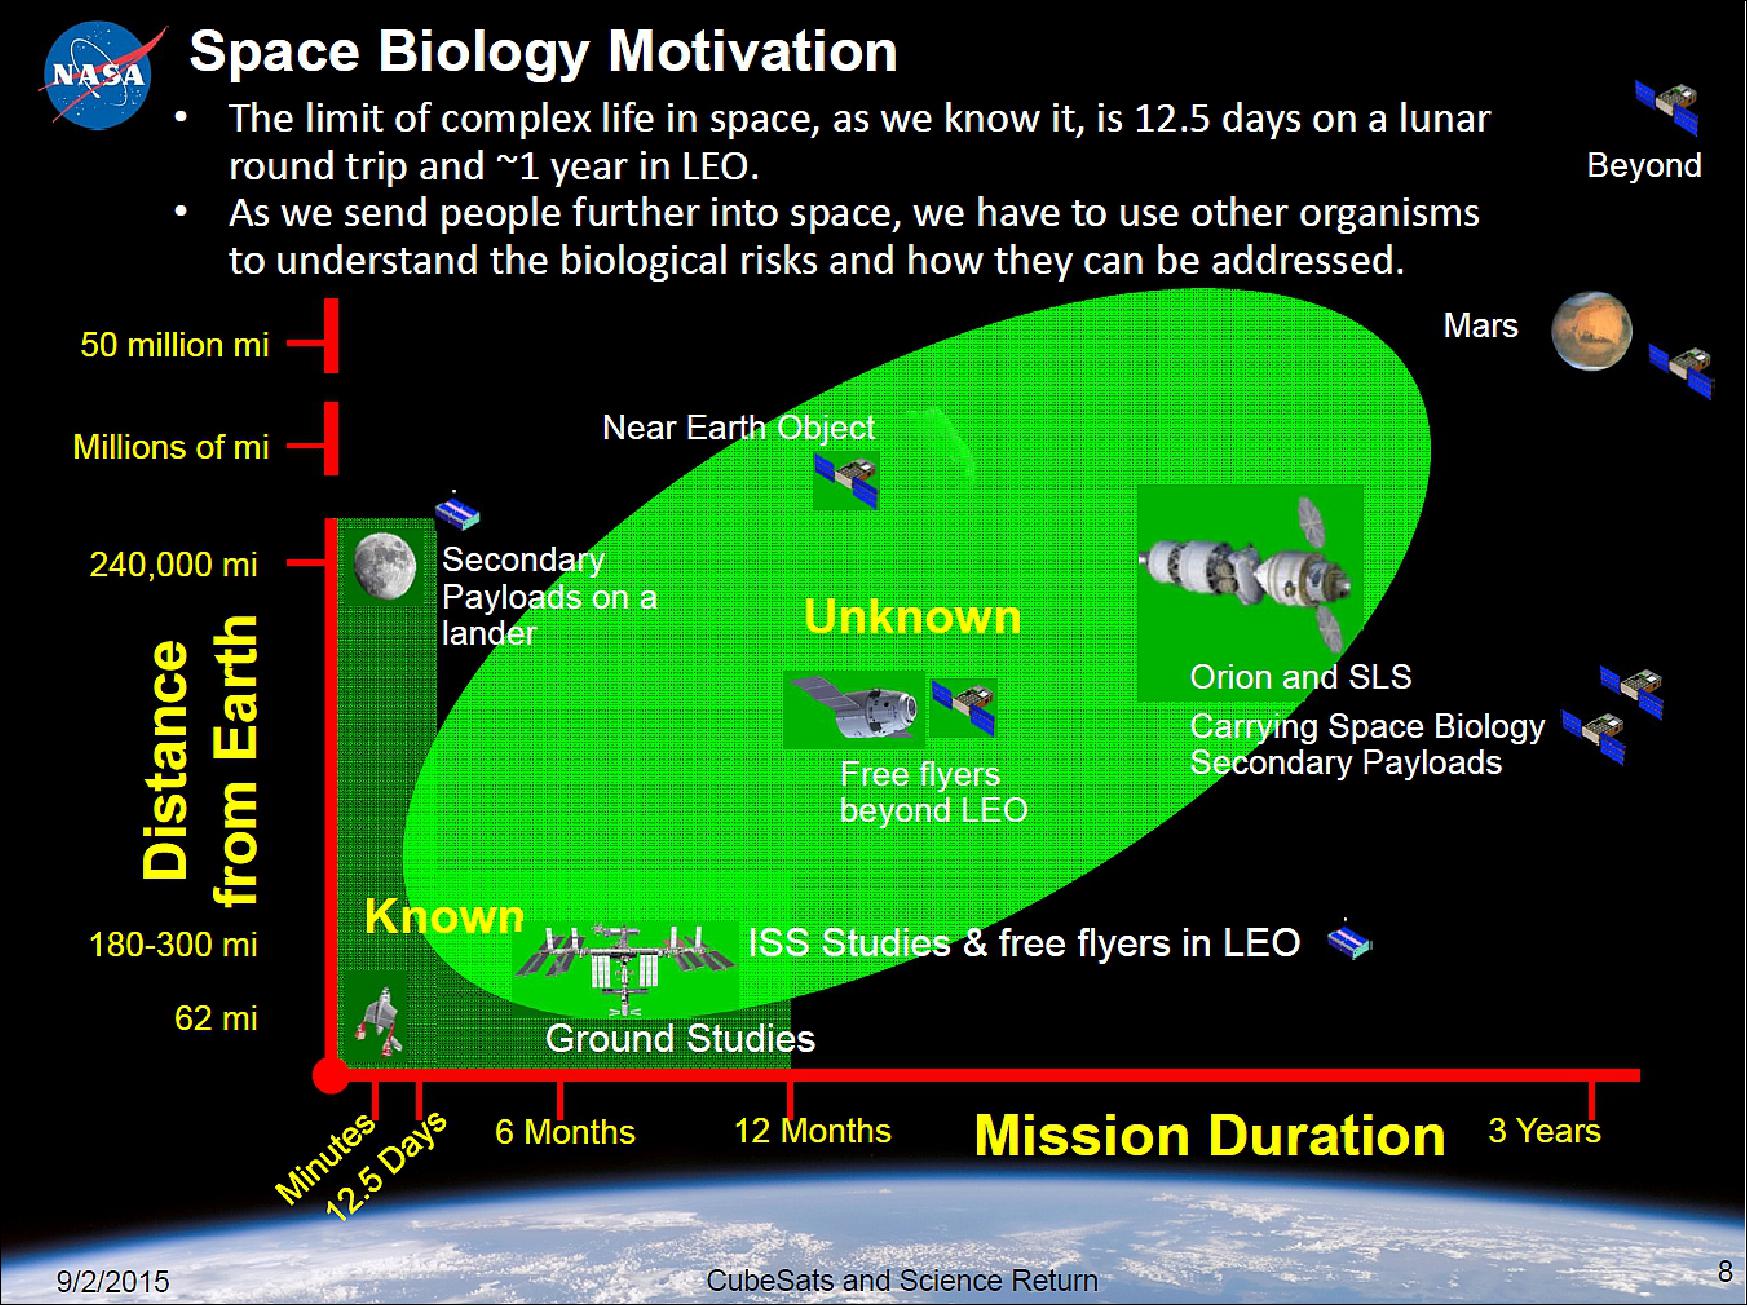 Figure 1: The goal is to enable NASA's long-term human exploration missions and also benefit life on Earth 4)